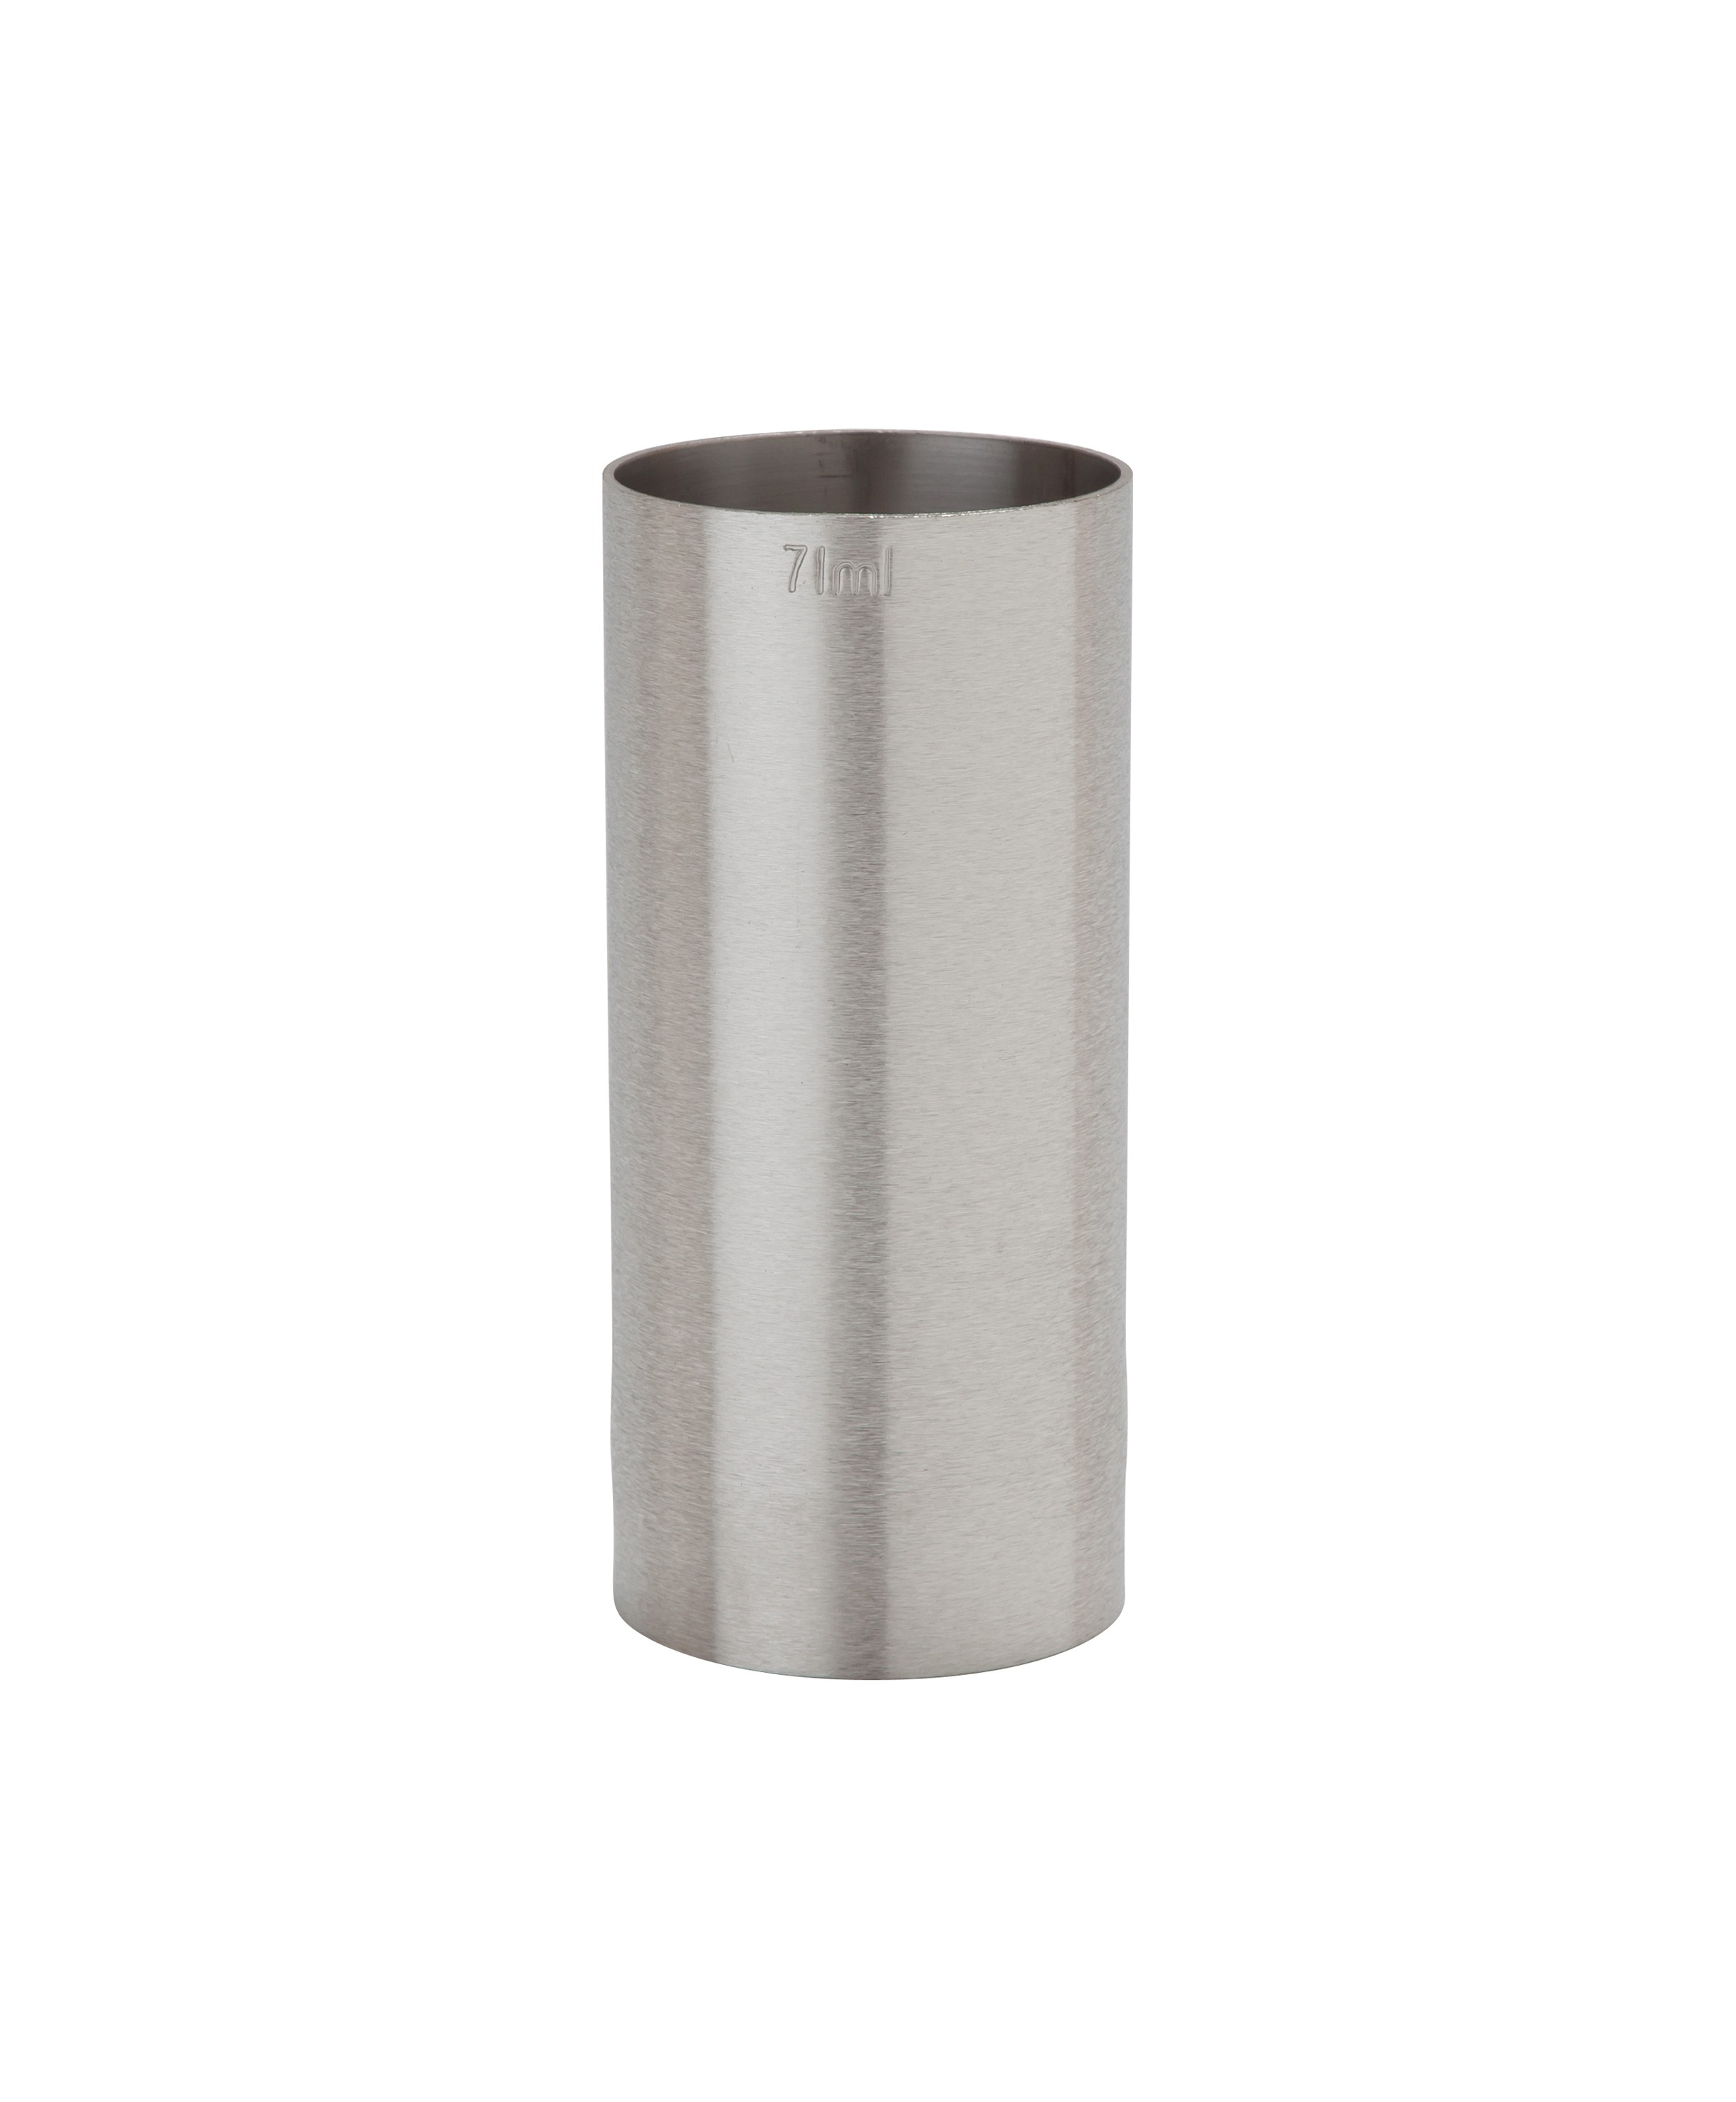 Stainless Steel Thimble Measure CE 71ml 